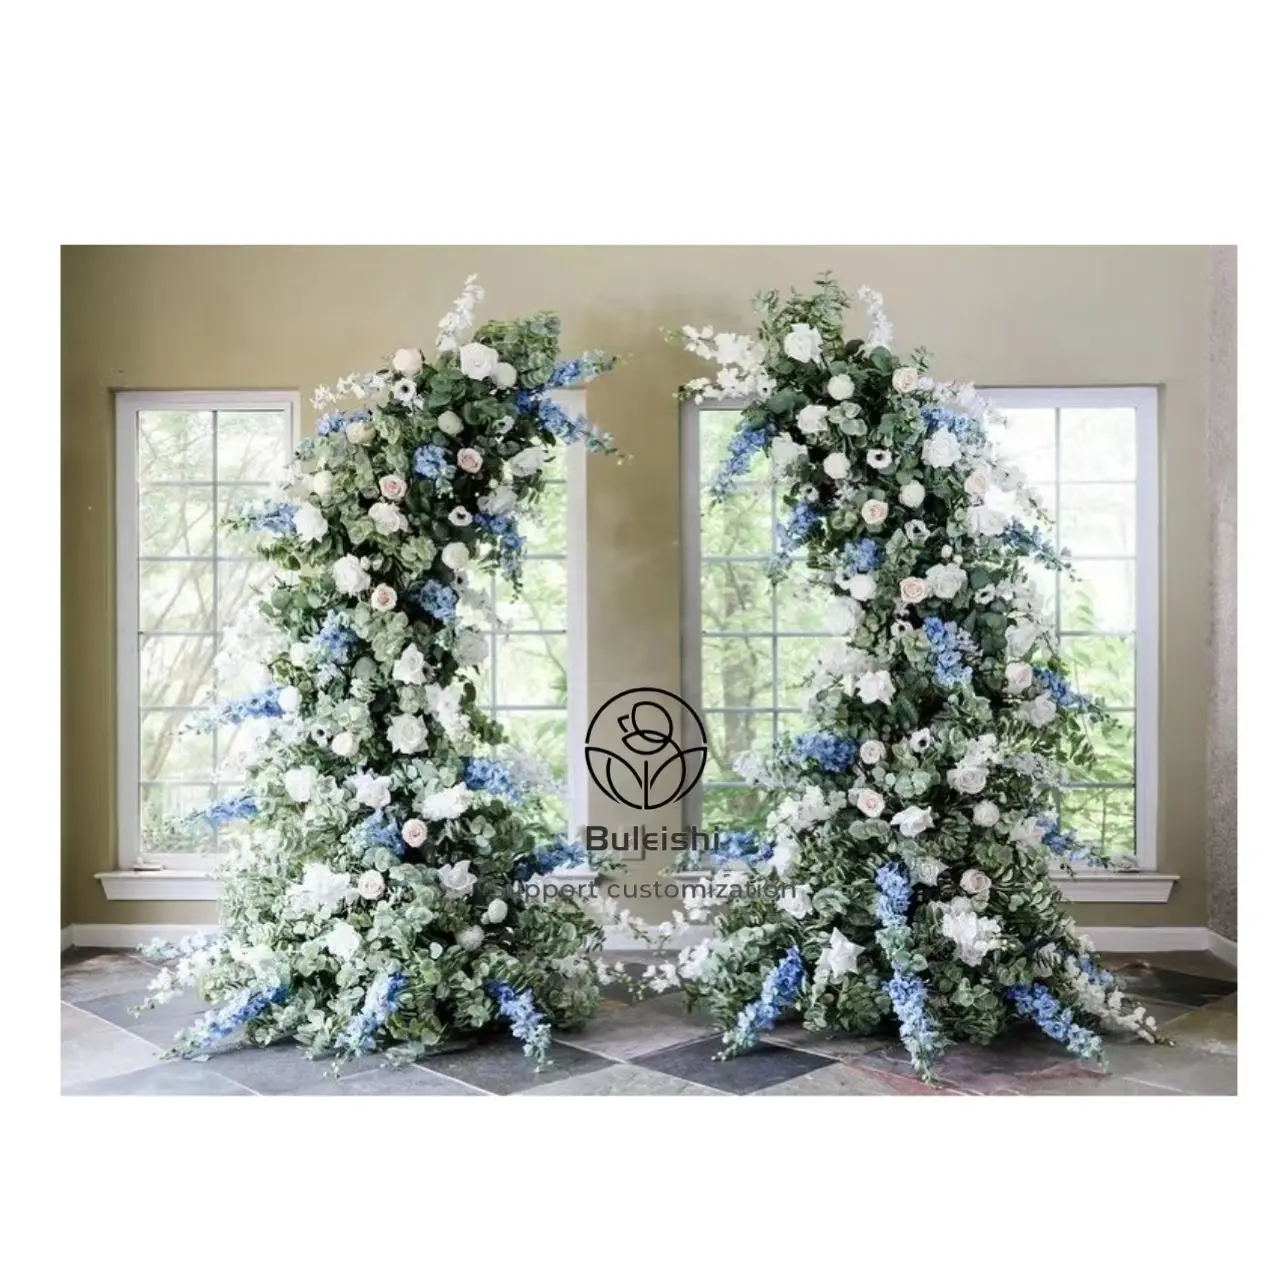 wedding flowers garland eucalyptus green pink white artificial flower arch for wedding backdrop decoration